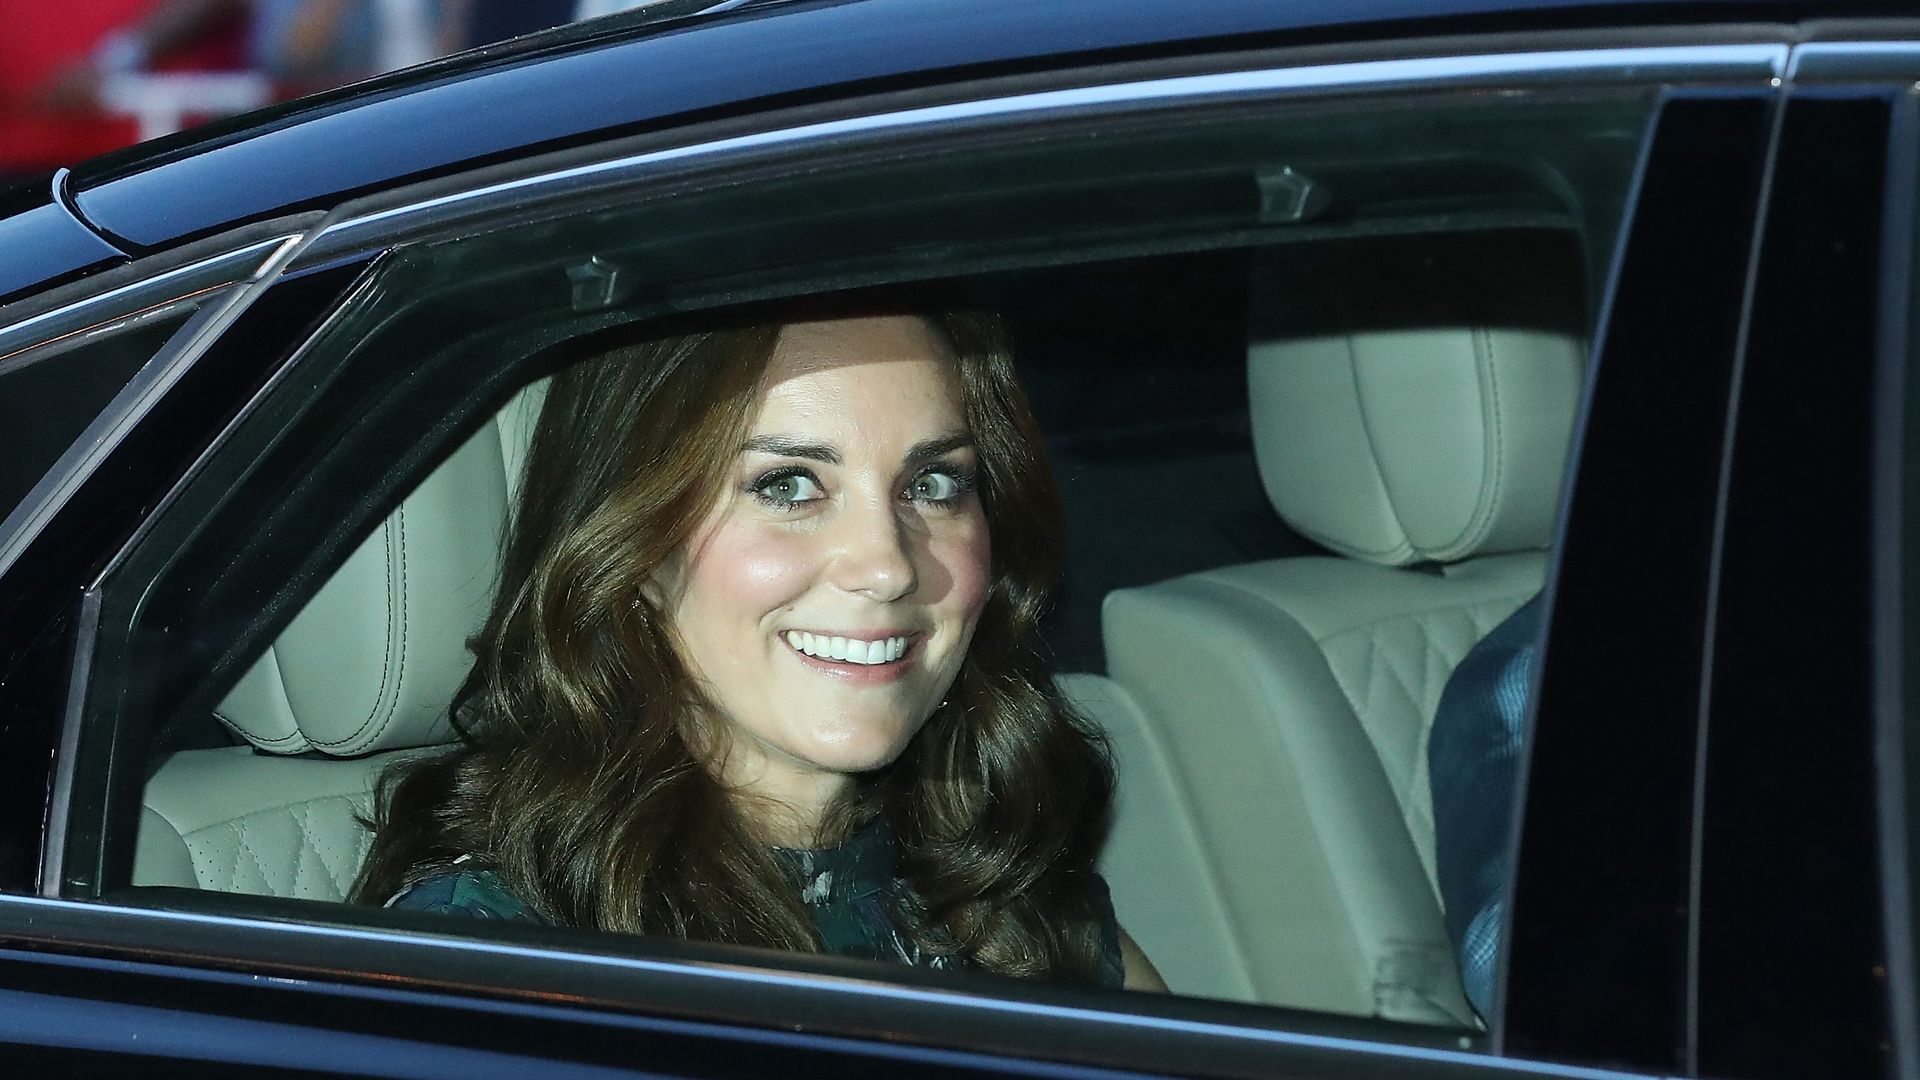 Catherine, Duchess of Cambridge depart in a limousine after attending a reception at Claerchen's Ballhaus dance hall following a day in Heidelberg on the second day of the royal visit to Germany 